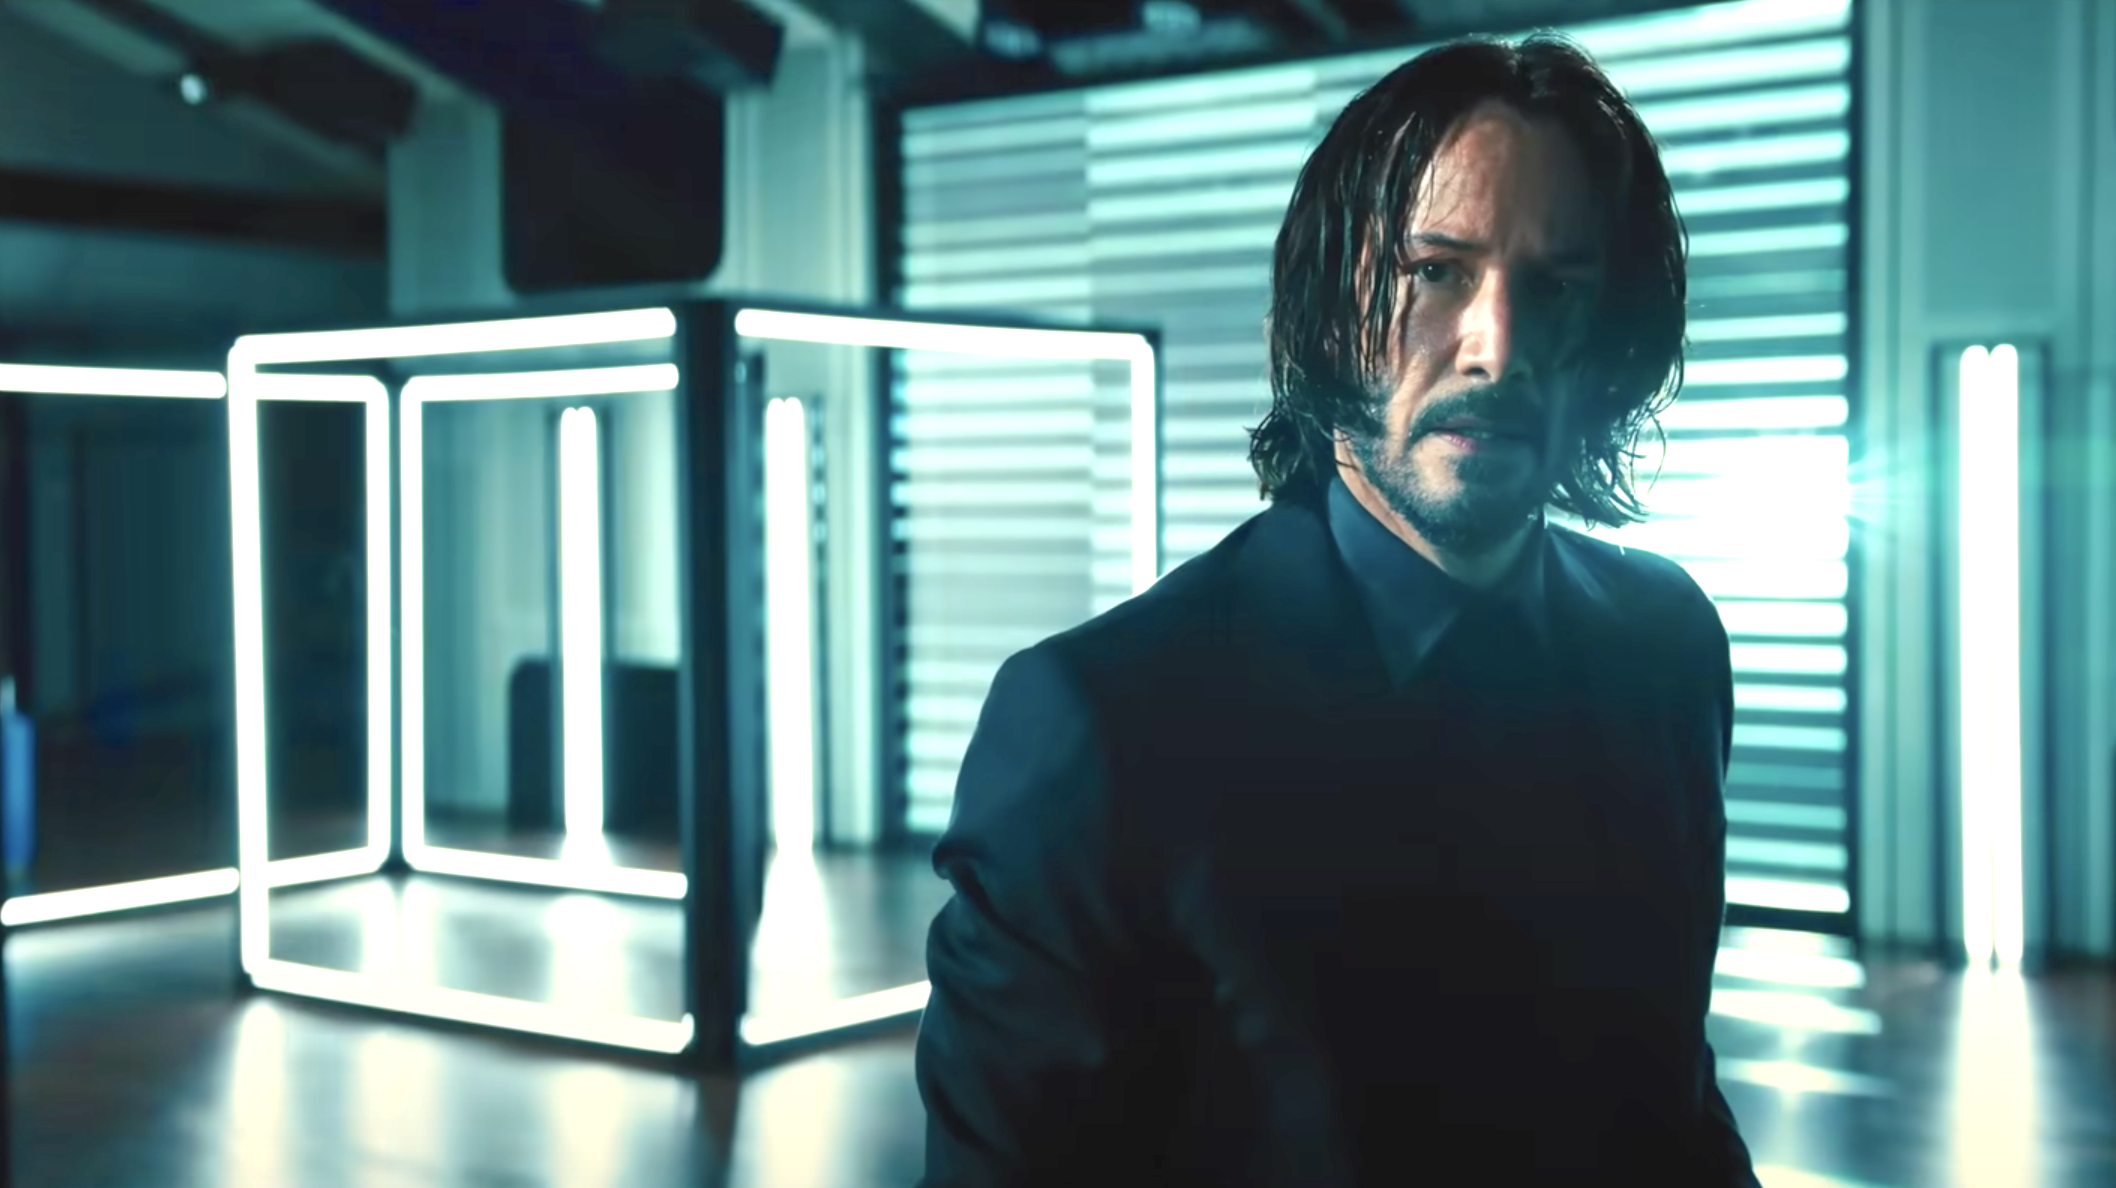 THE CONTINENTAL Trailer Takes the JOHN WICK Spinoff Series Into a Raging  War - Nerdist